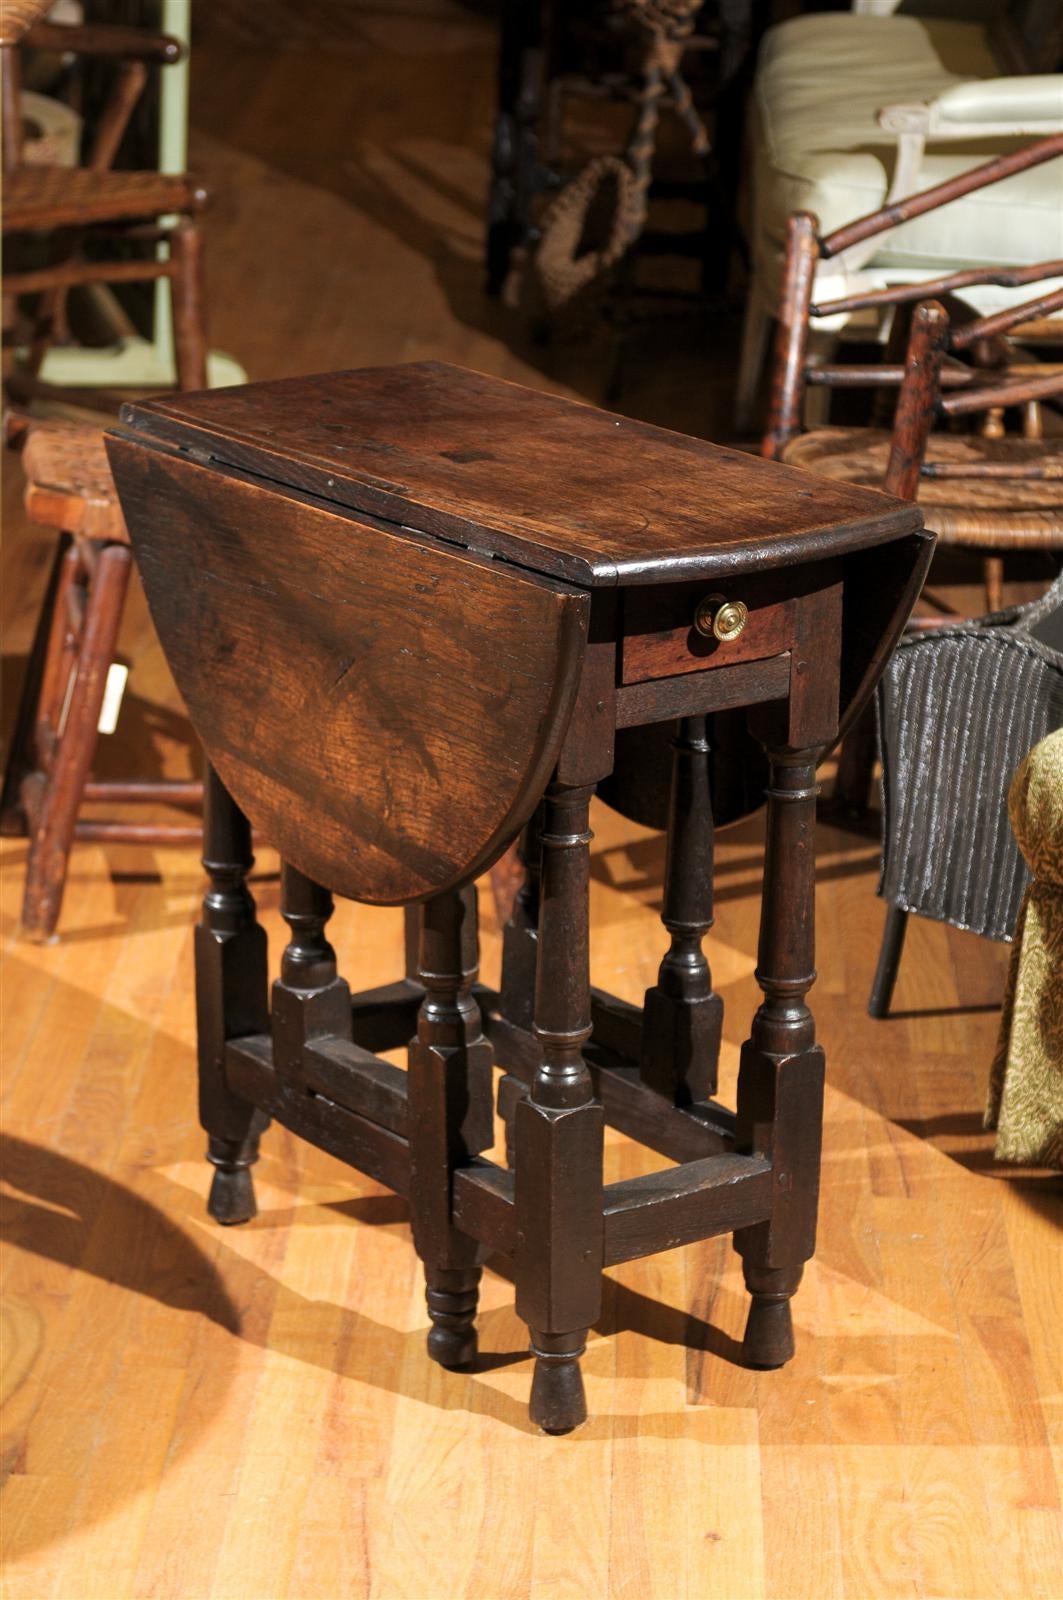 This is a wonderful somewhat primitive gate leg table with charm and patina. The edge of the table has a rounded profile. The table top is solid wood with a drawer in the center. The wood is dark English Oak with pegged construction.